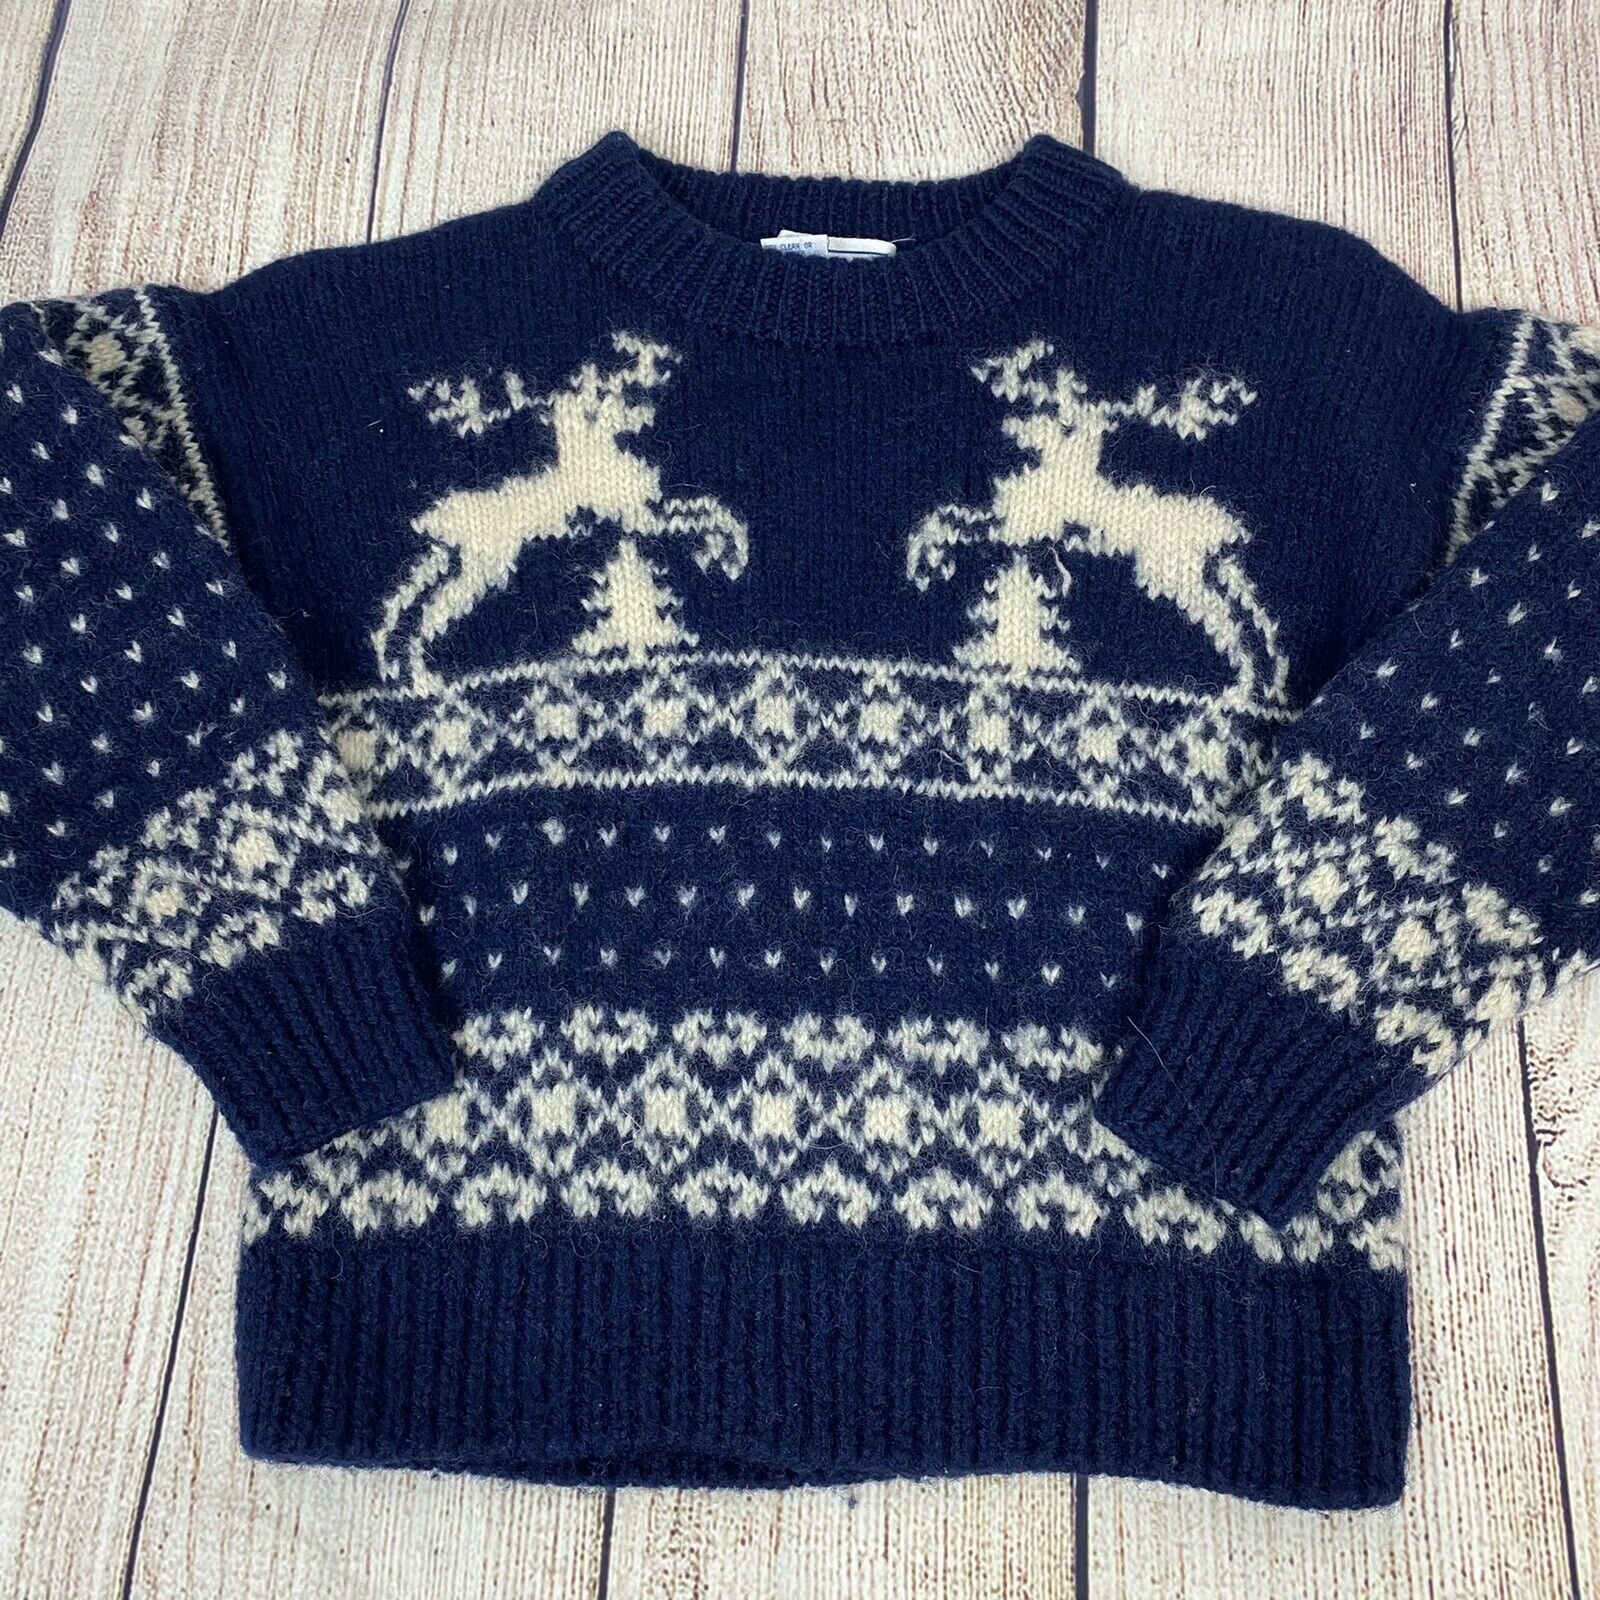 Shirley Duffy One Of A Kind Virgin Wool Reindeer Sweater Childs 8/10 Unisex